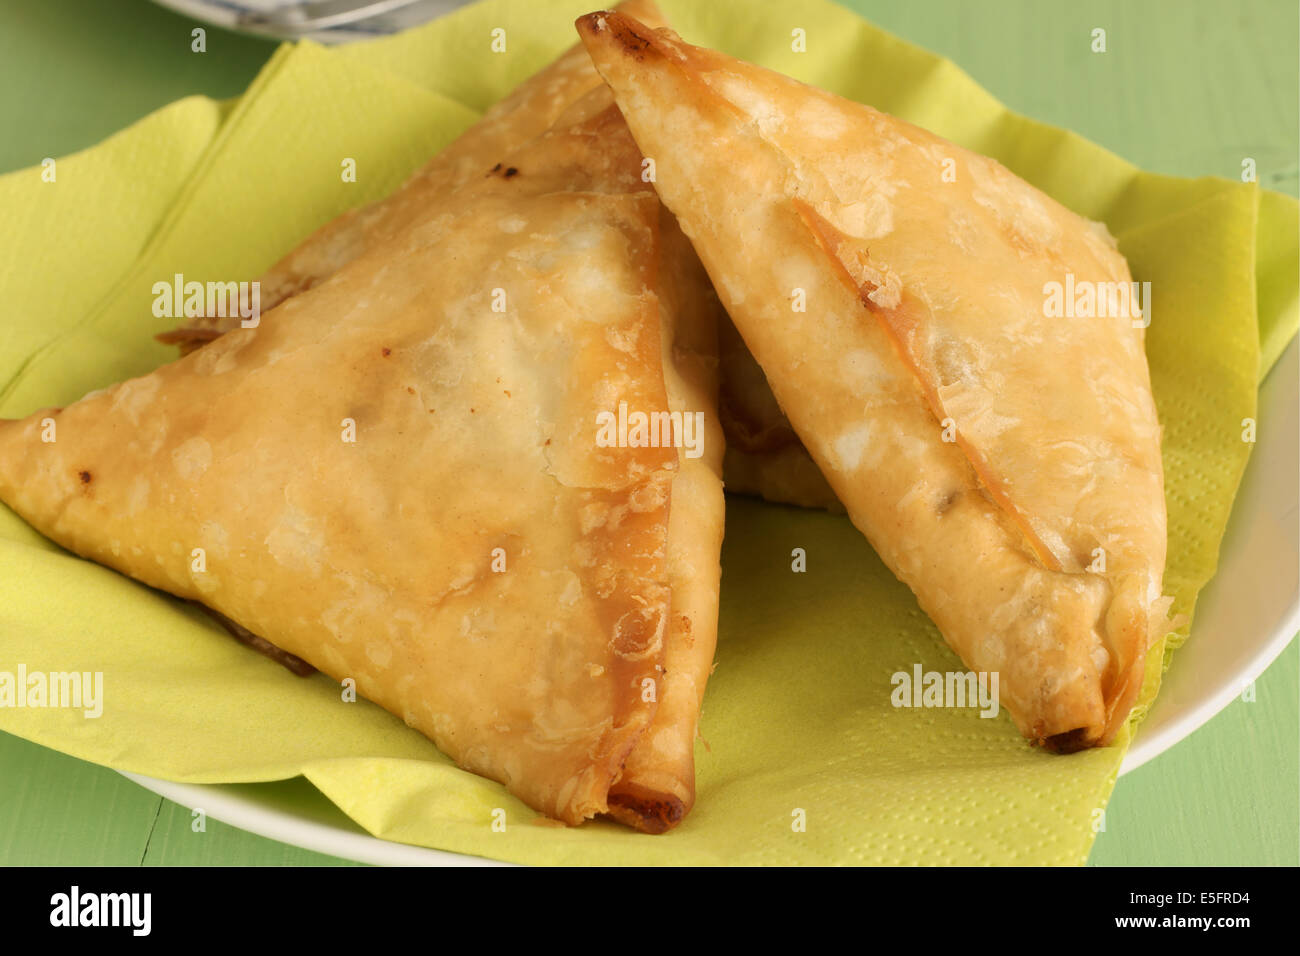 Samosas a spicy blend of vegetables or meat wrapped in a deep fried triangular pastry parcel Stock Photo